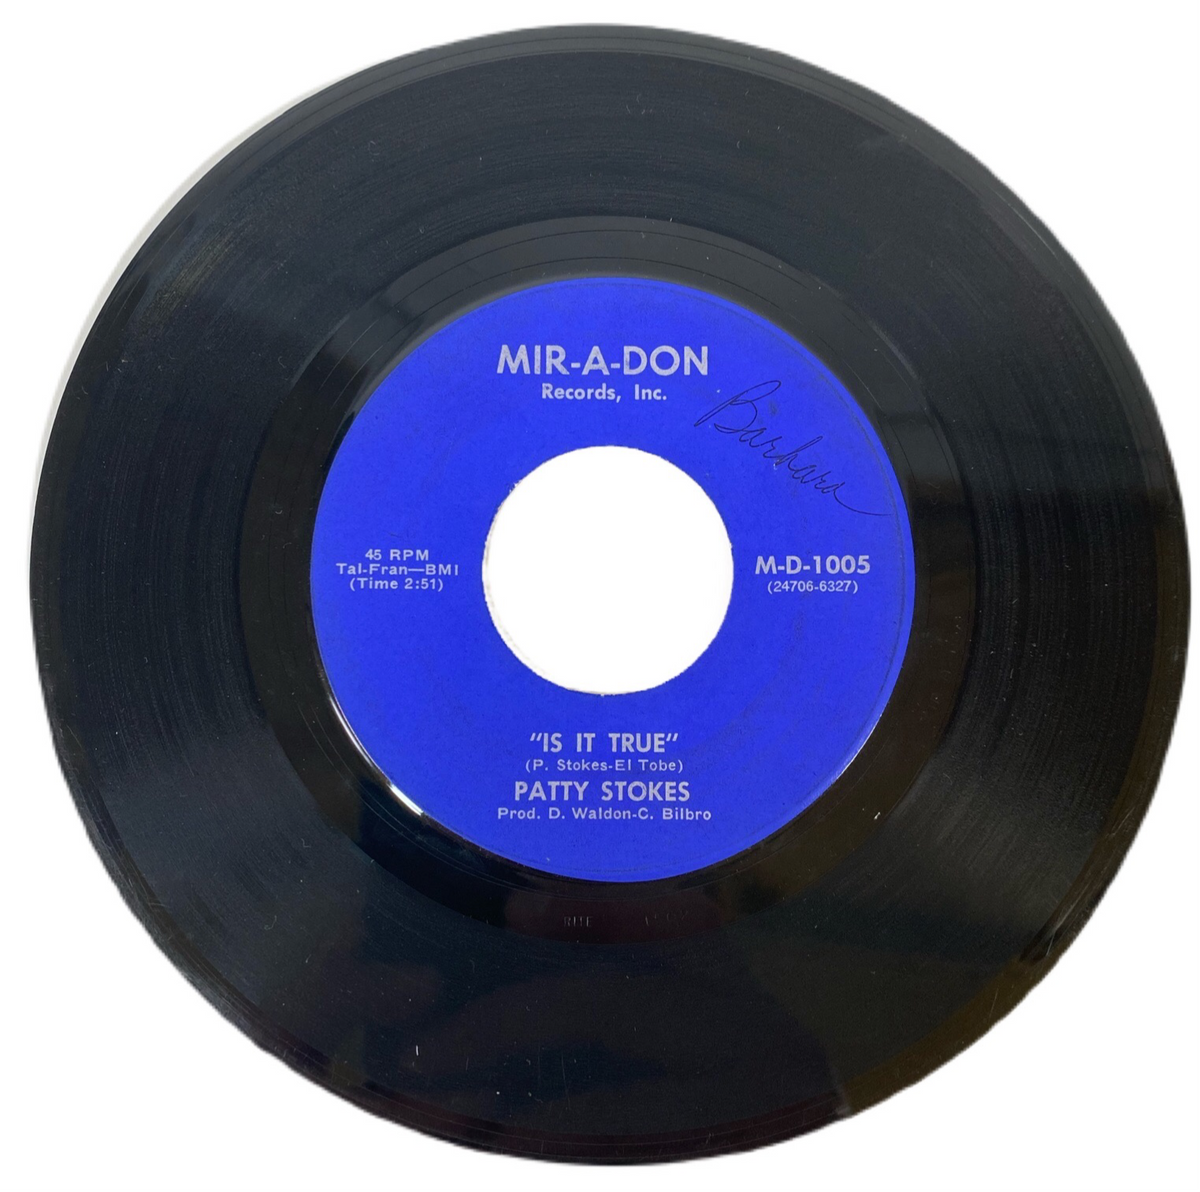 Patty Stokes “Good Girl (Can You be?)” 45